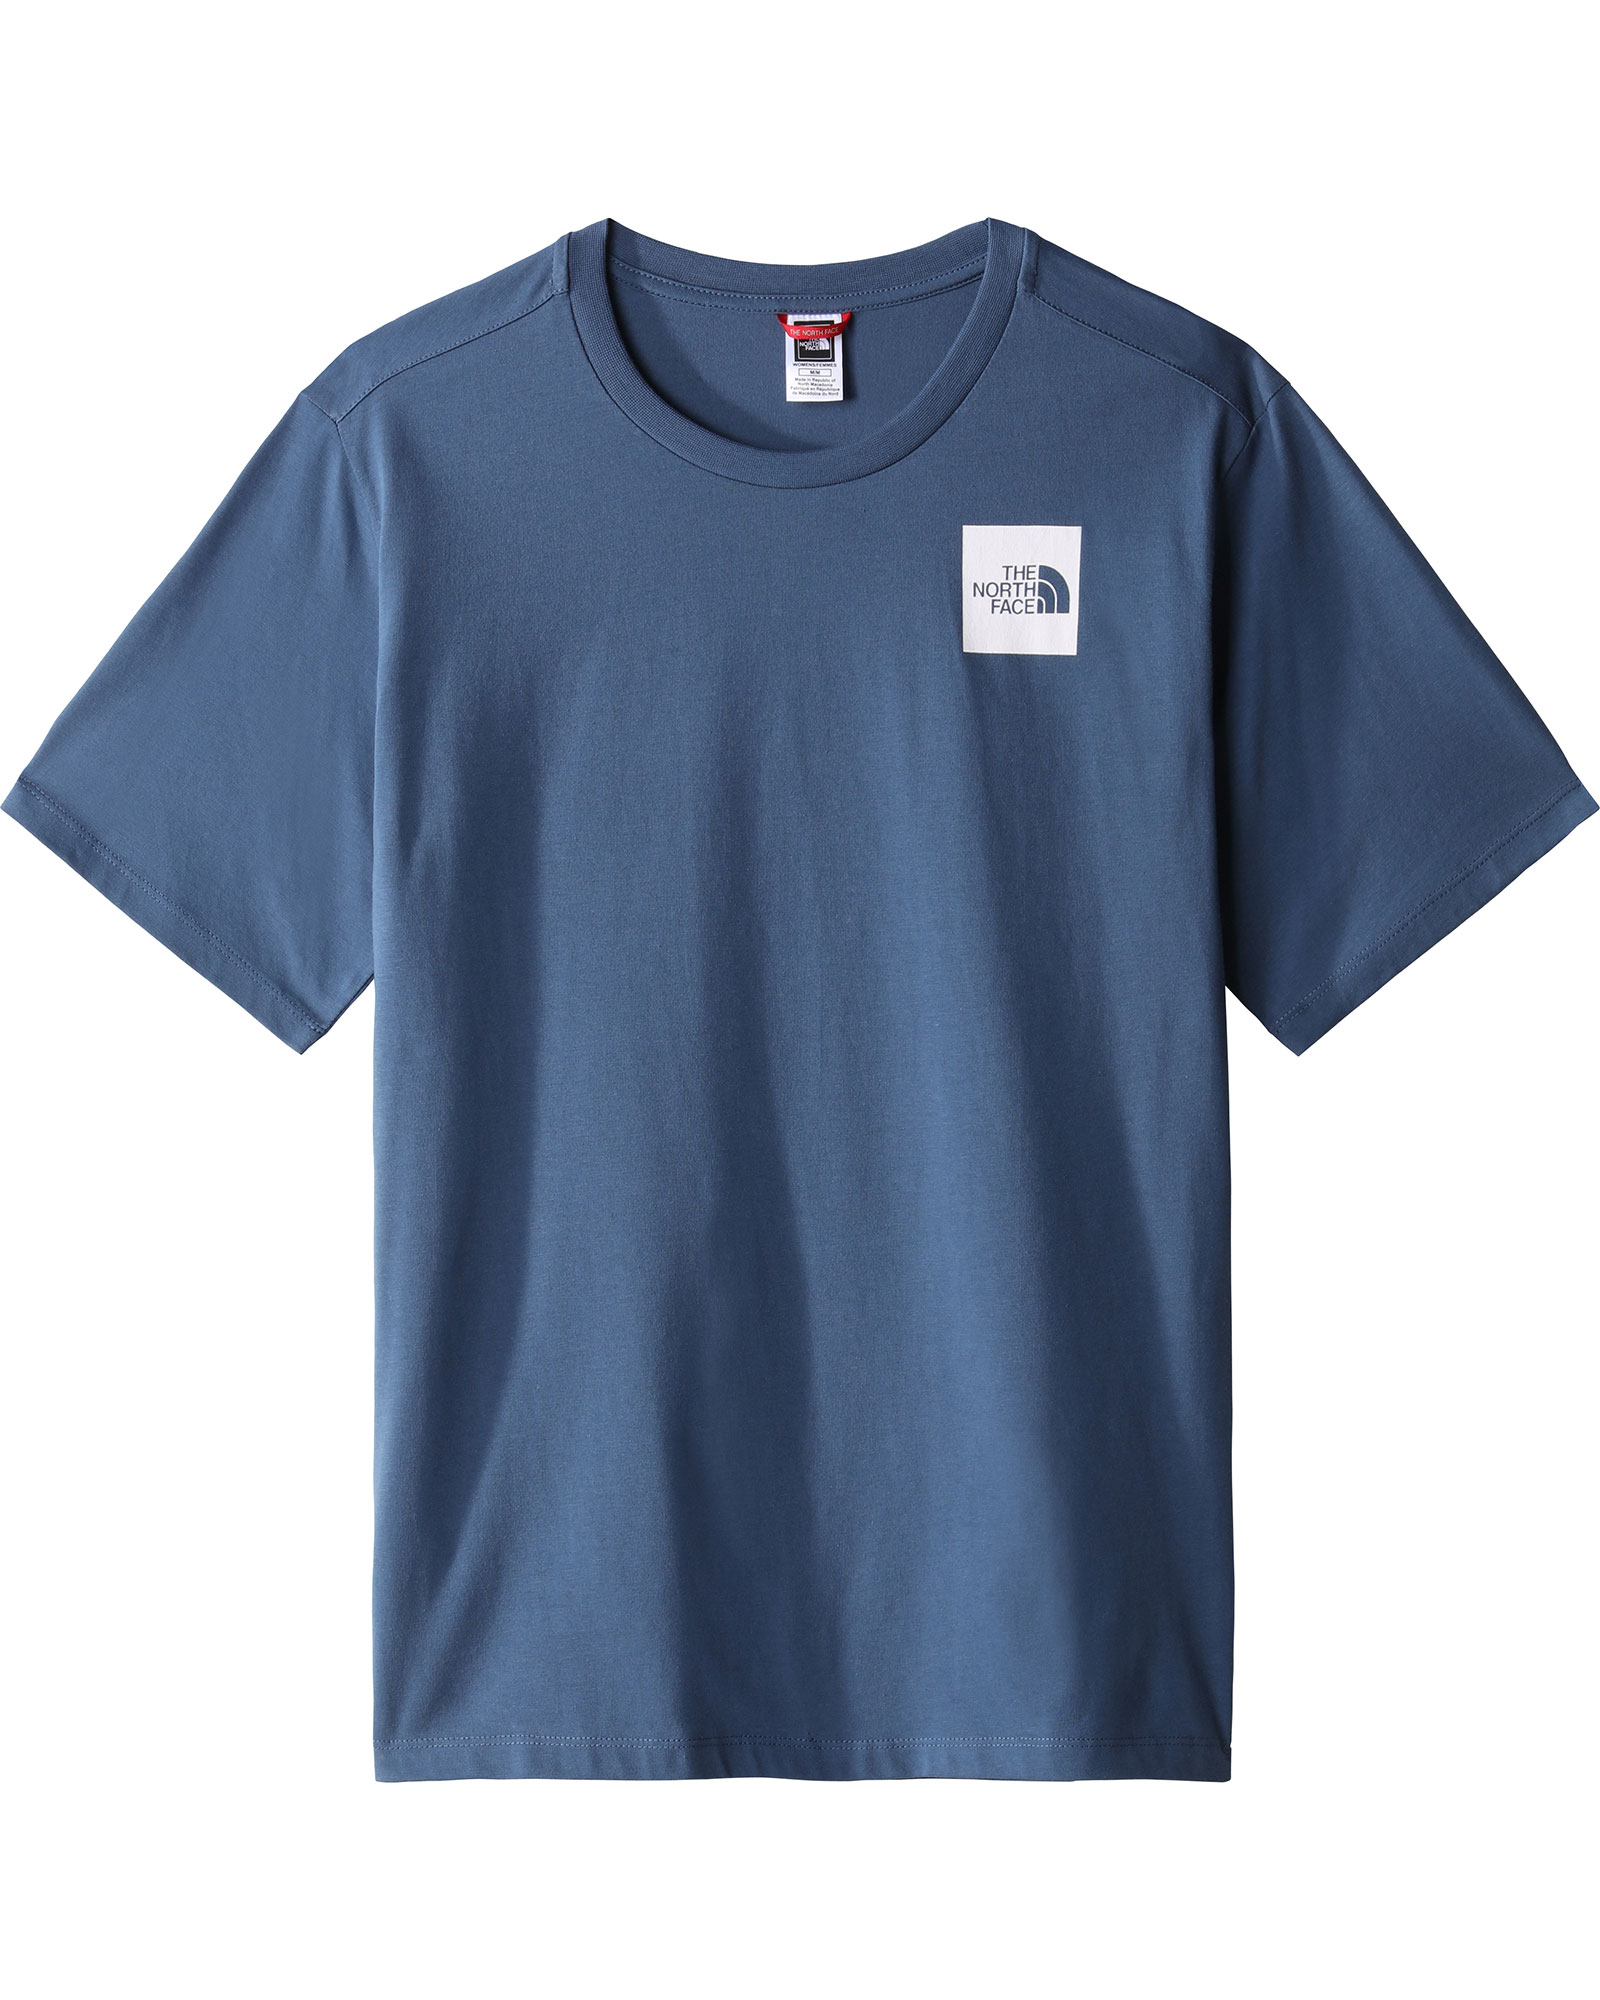 The North Face Women’s Relaxed Fine T Shirt - Shady Blue XL